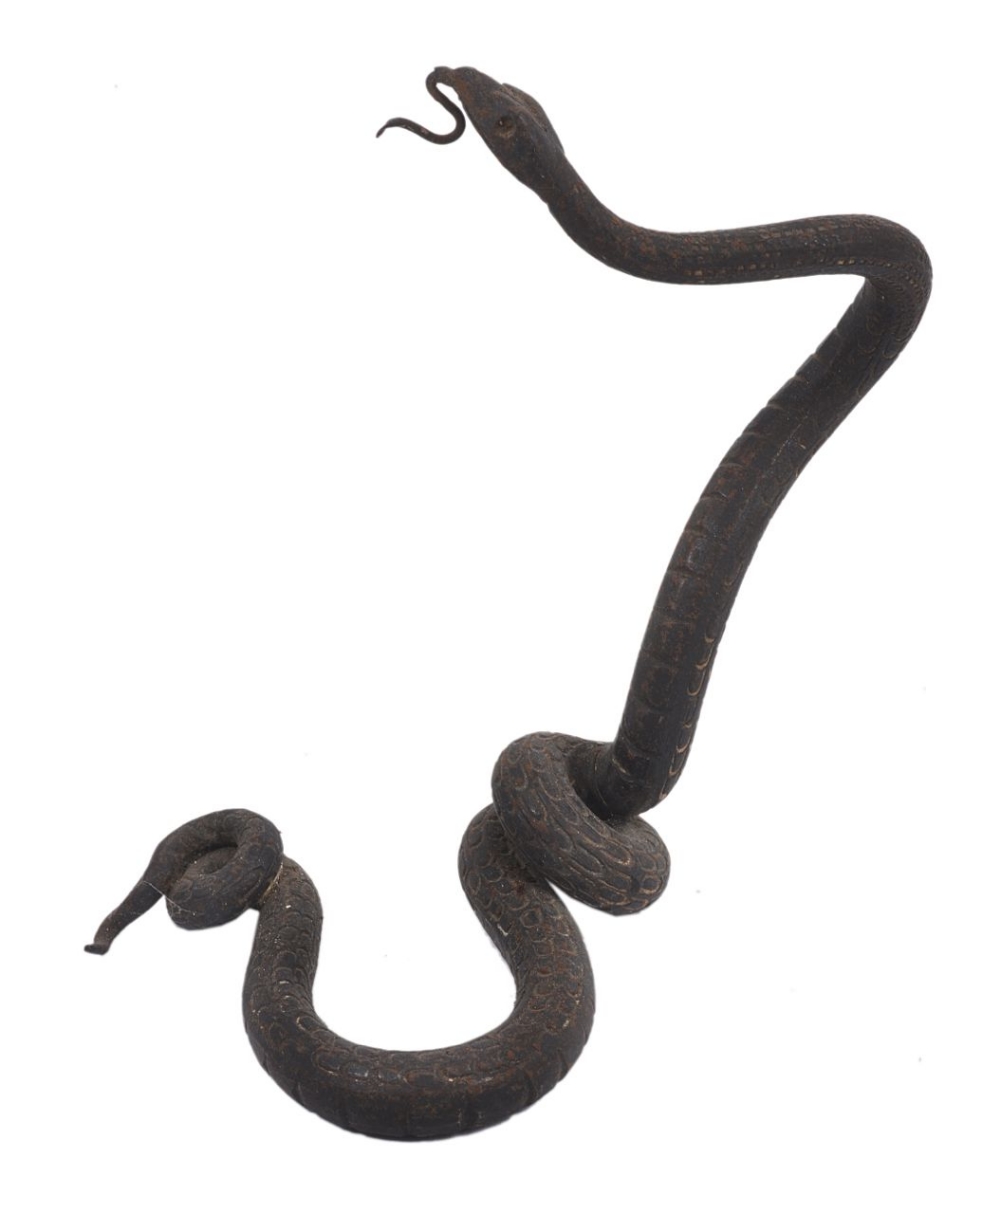 A bronze watch holder in the form of a snake, the coiled snake realistically modelled with projected